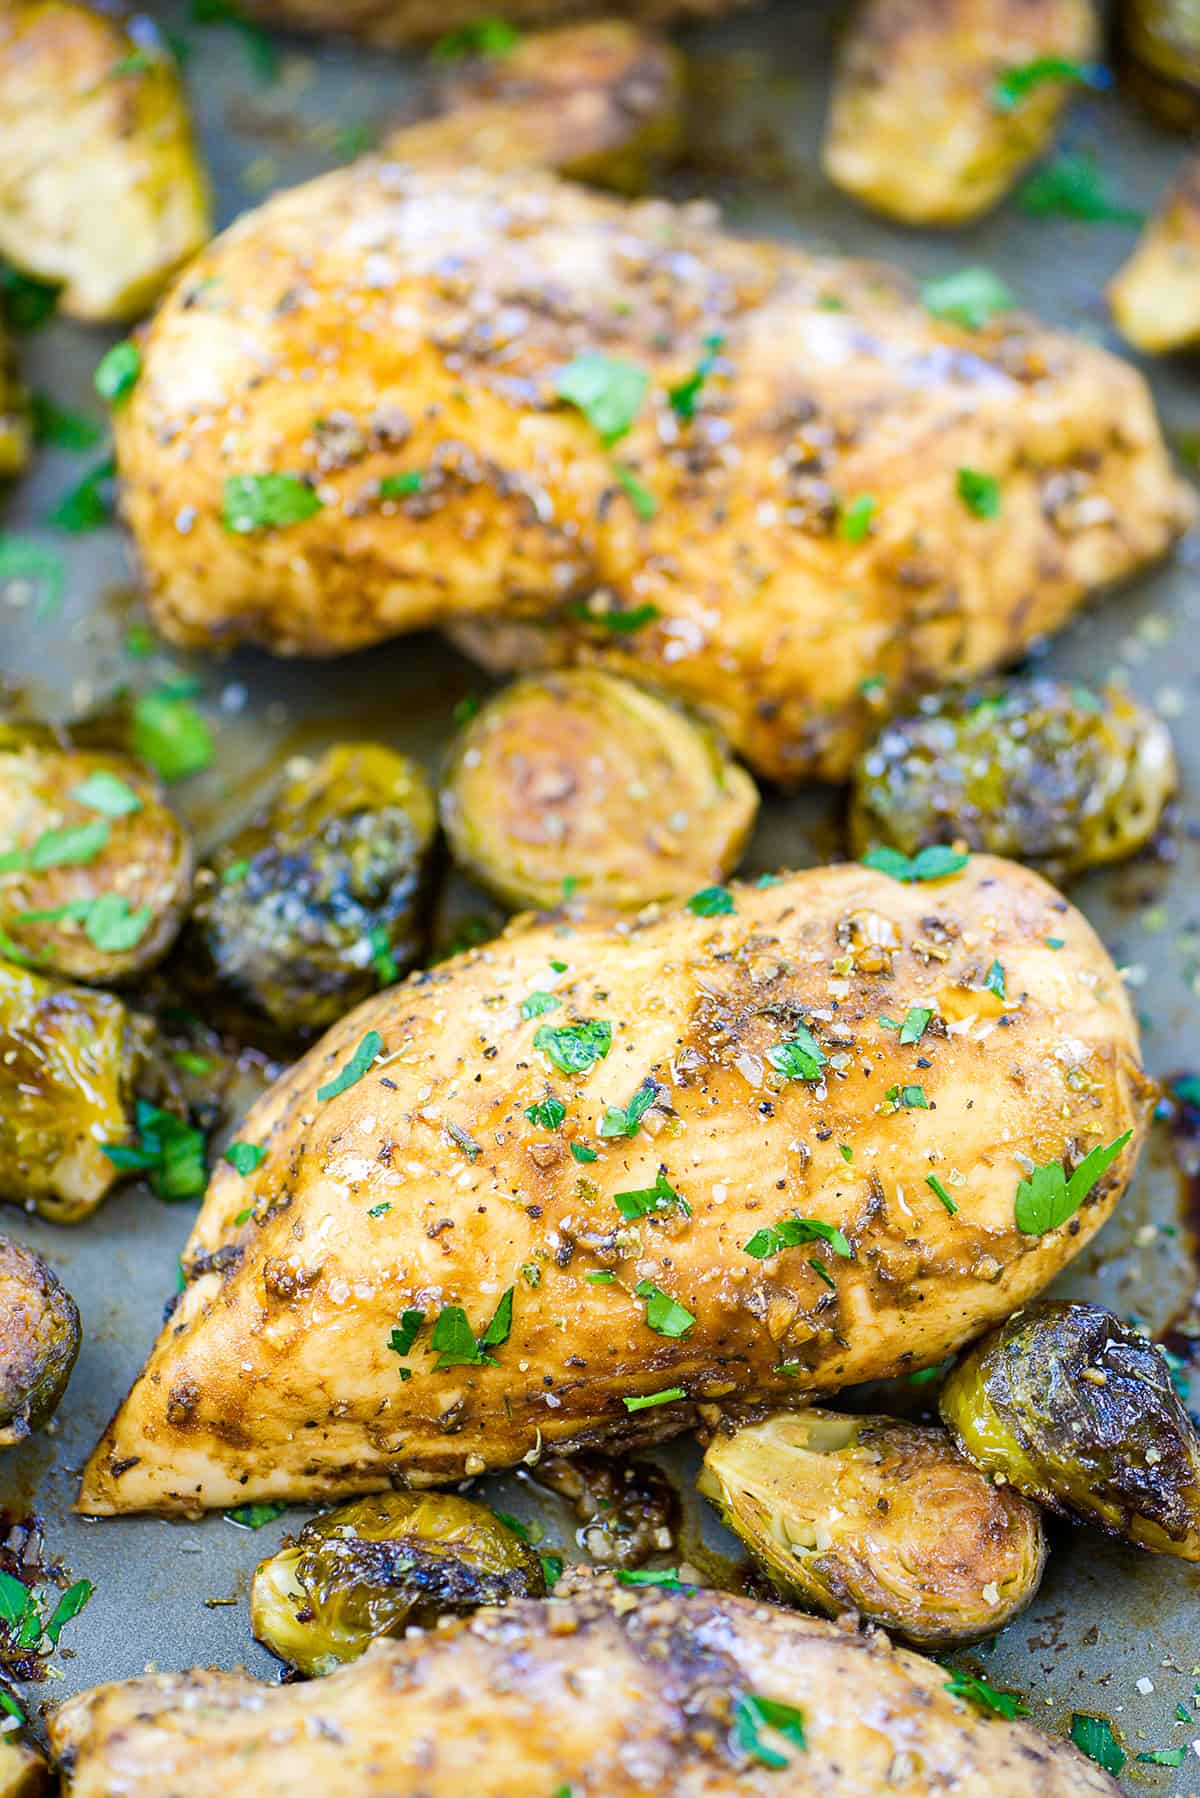 Chicken and Brussels sprouts on sheet pan.